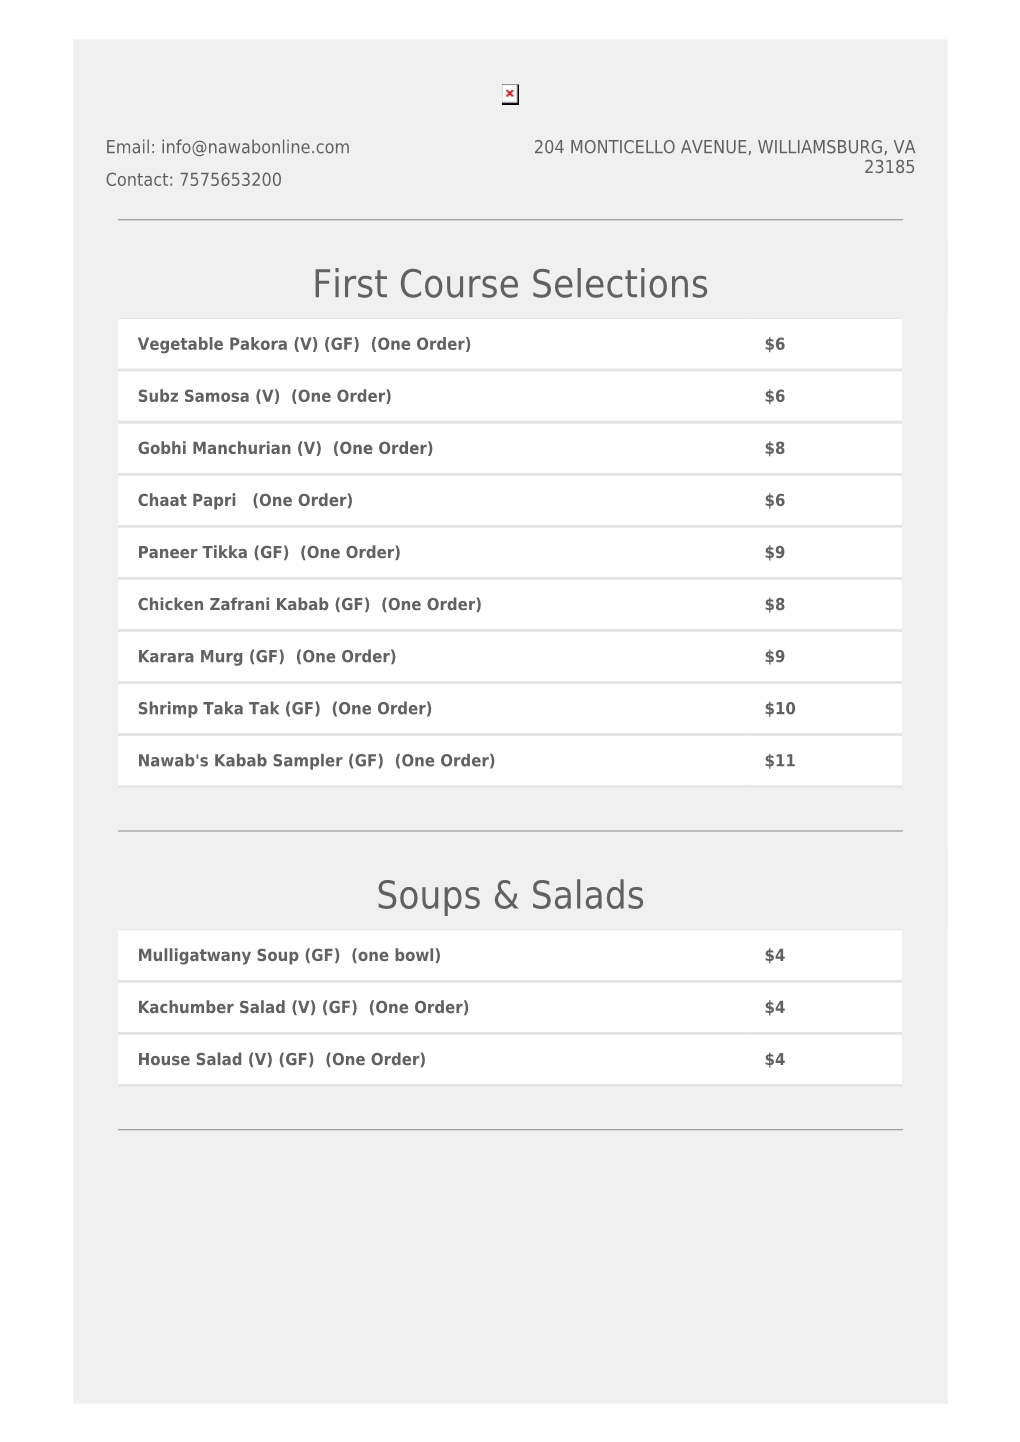 First Course Selections Soups & Salads